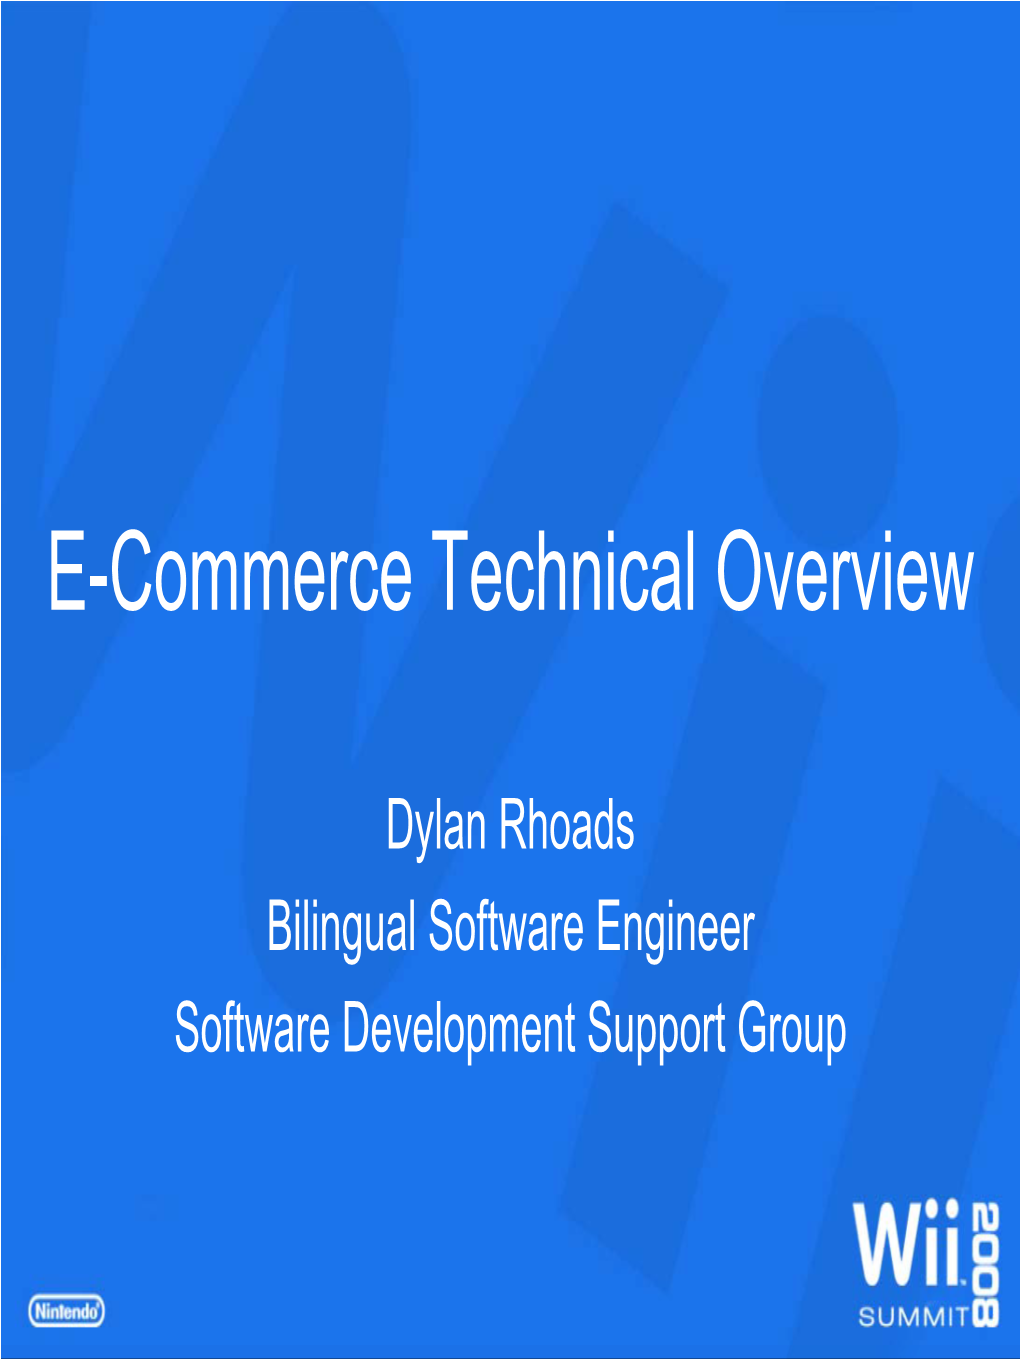 E-Commerce Library Overview 2